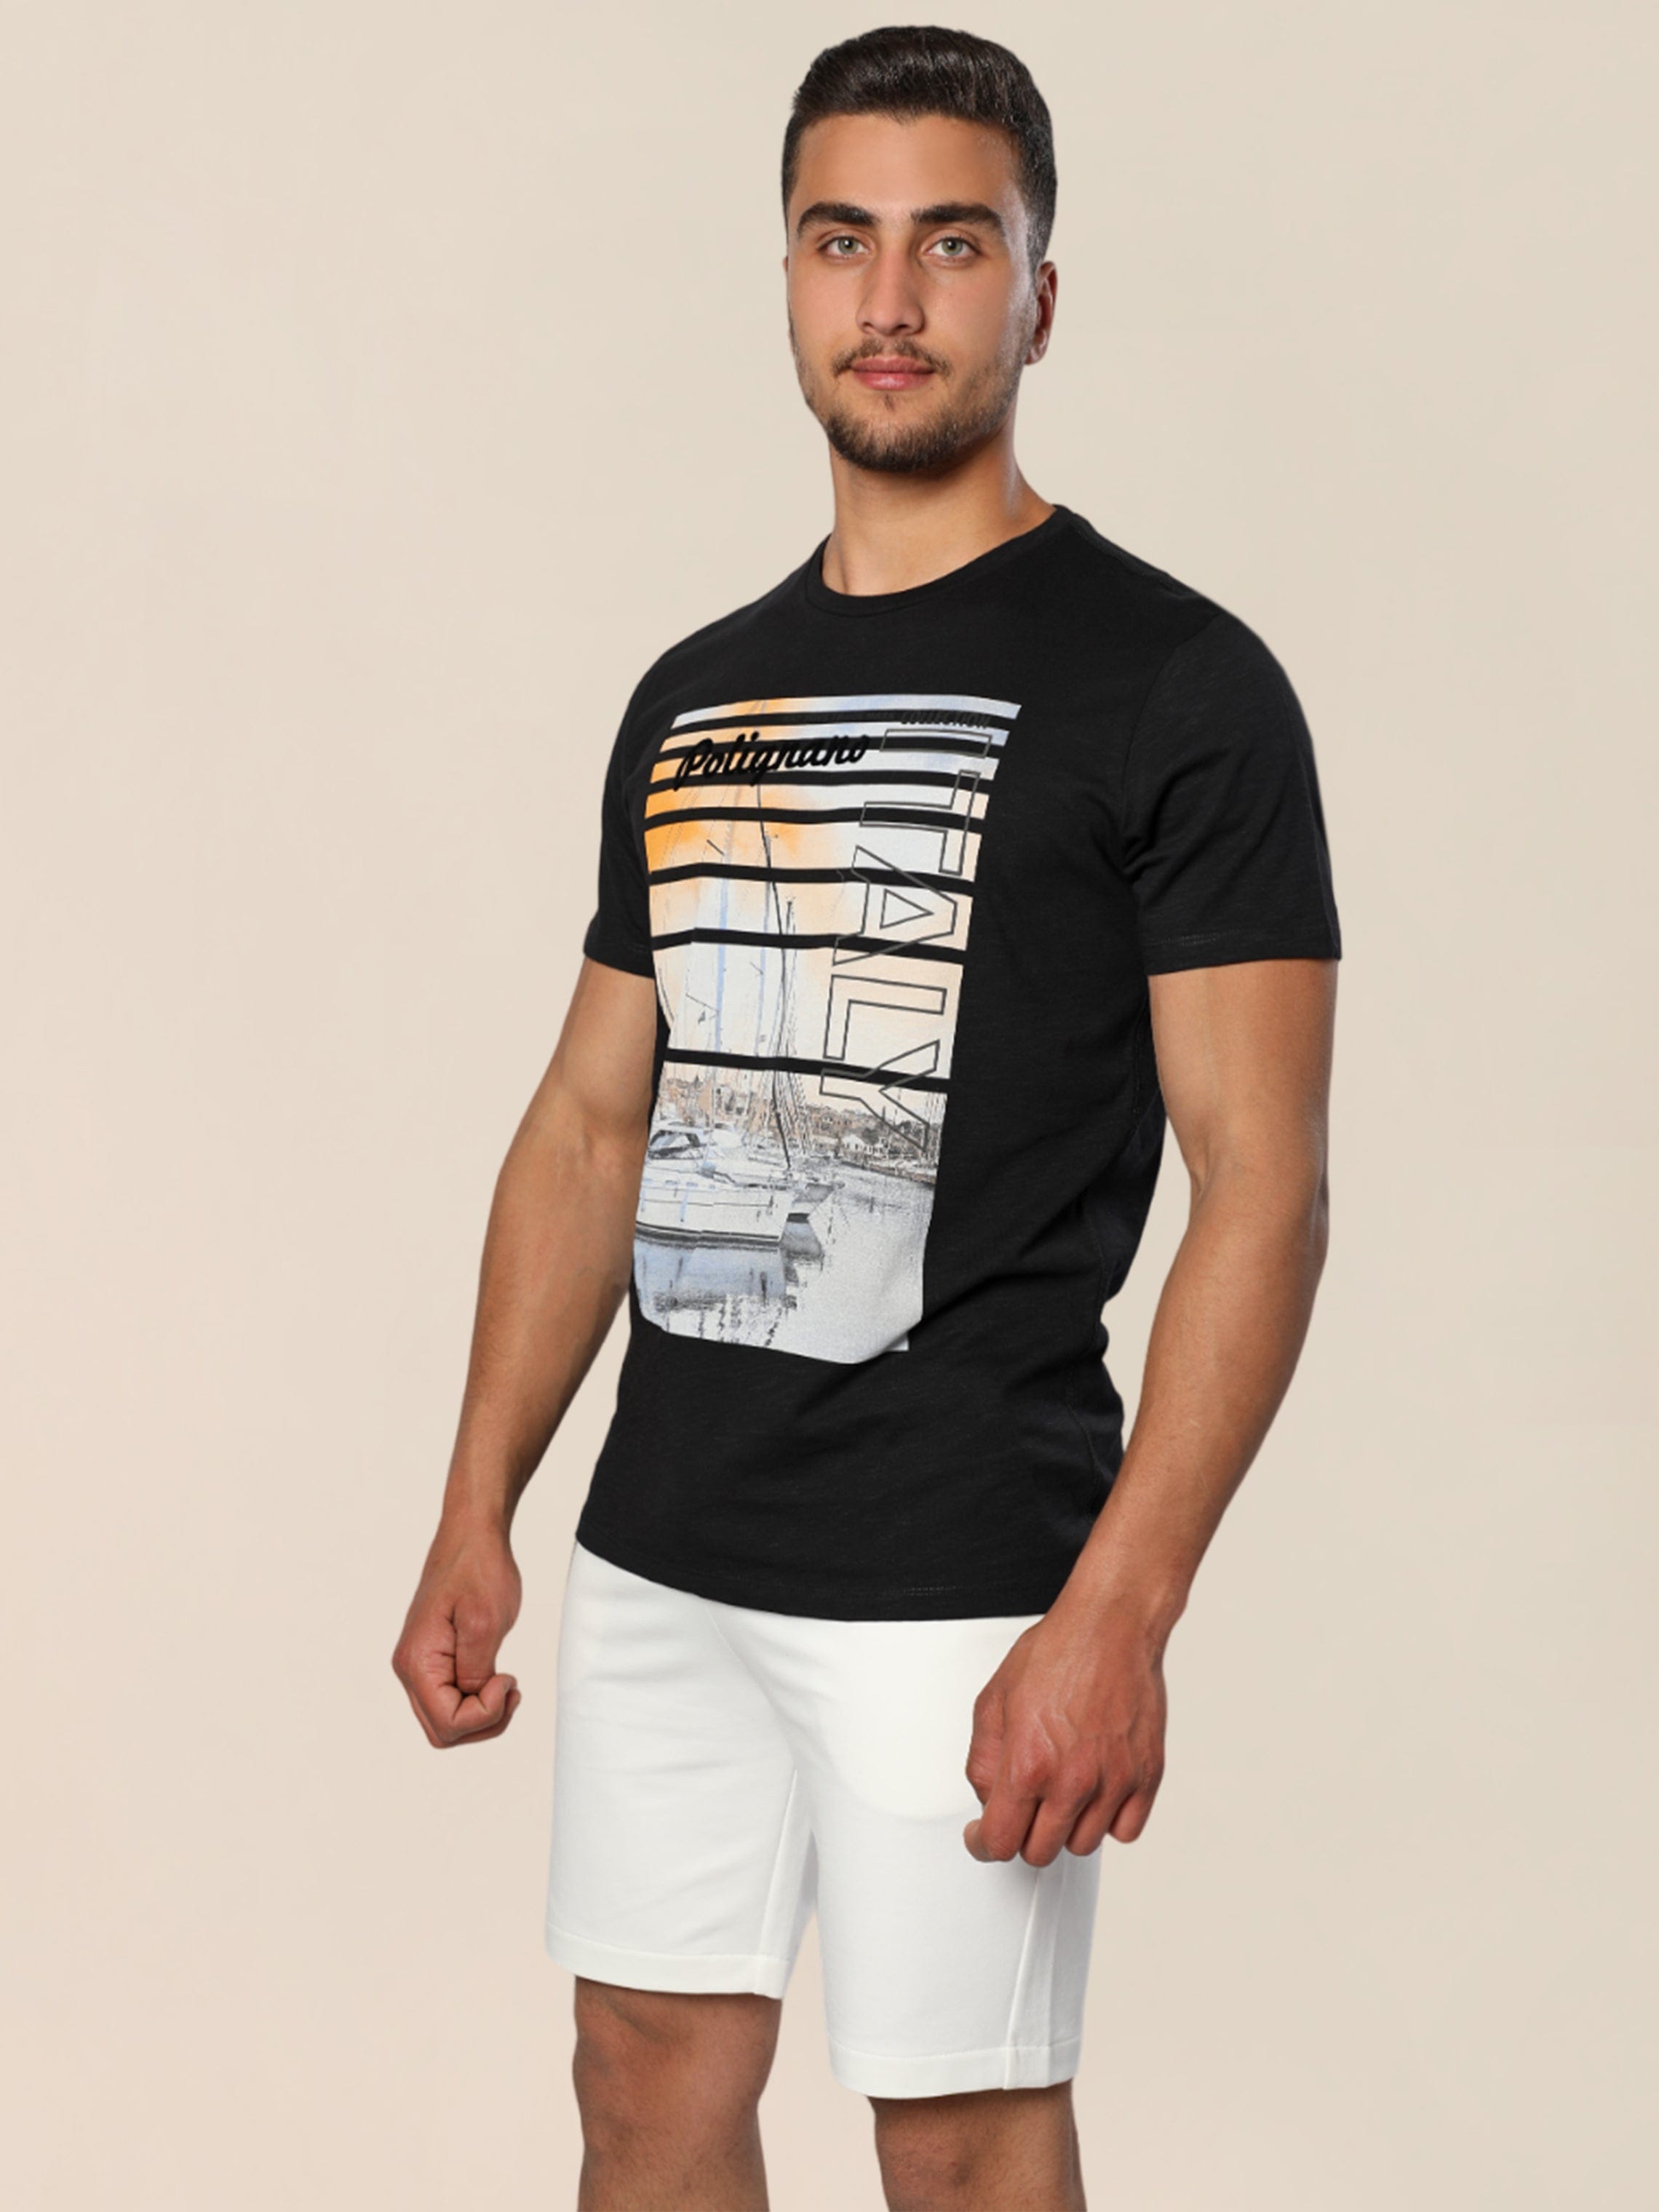 Men Summer T-shirt With Italy Themed Printed Design